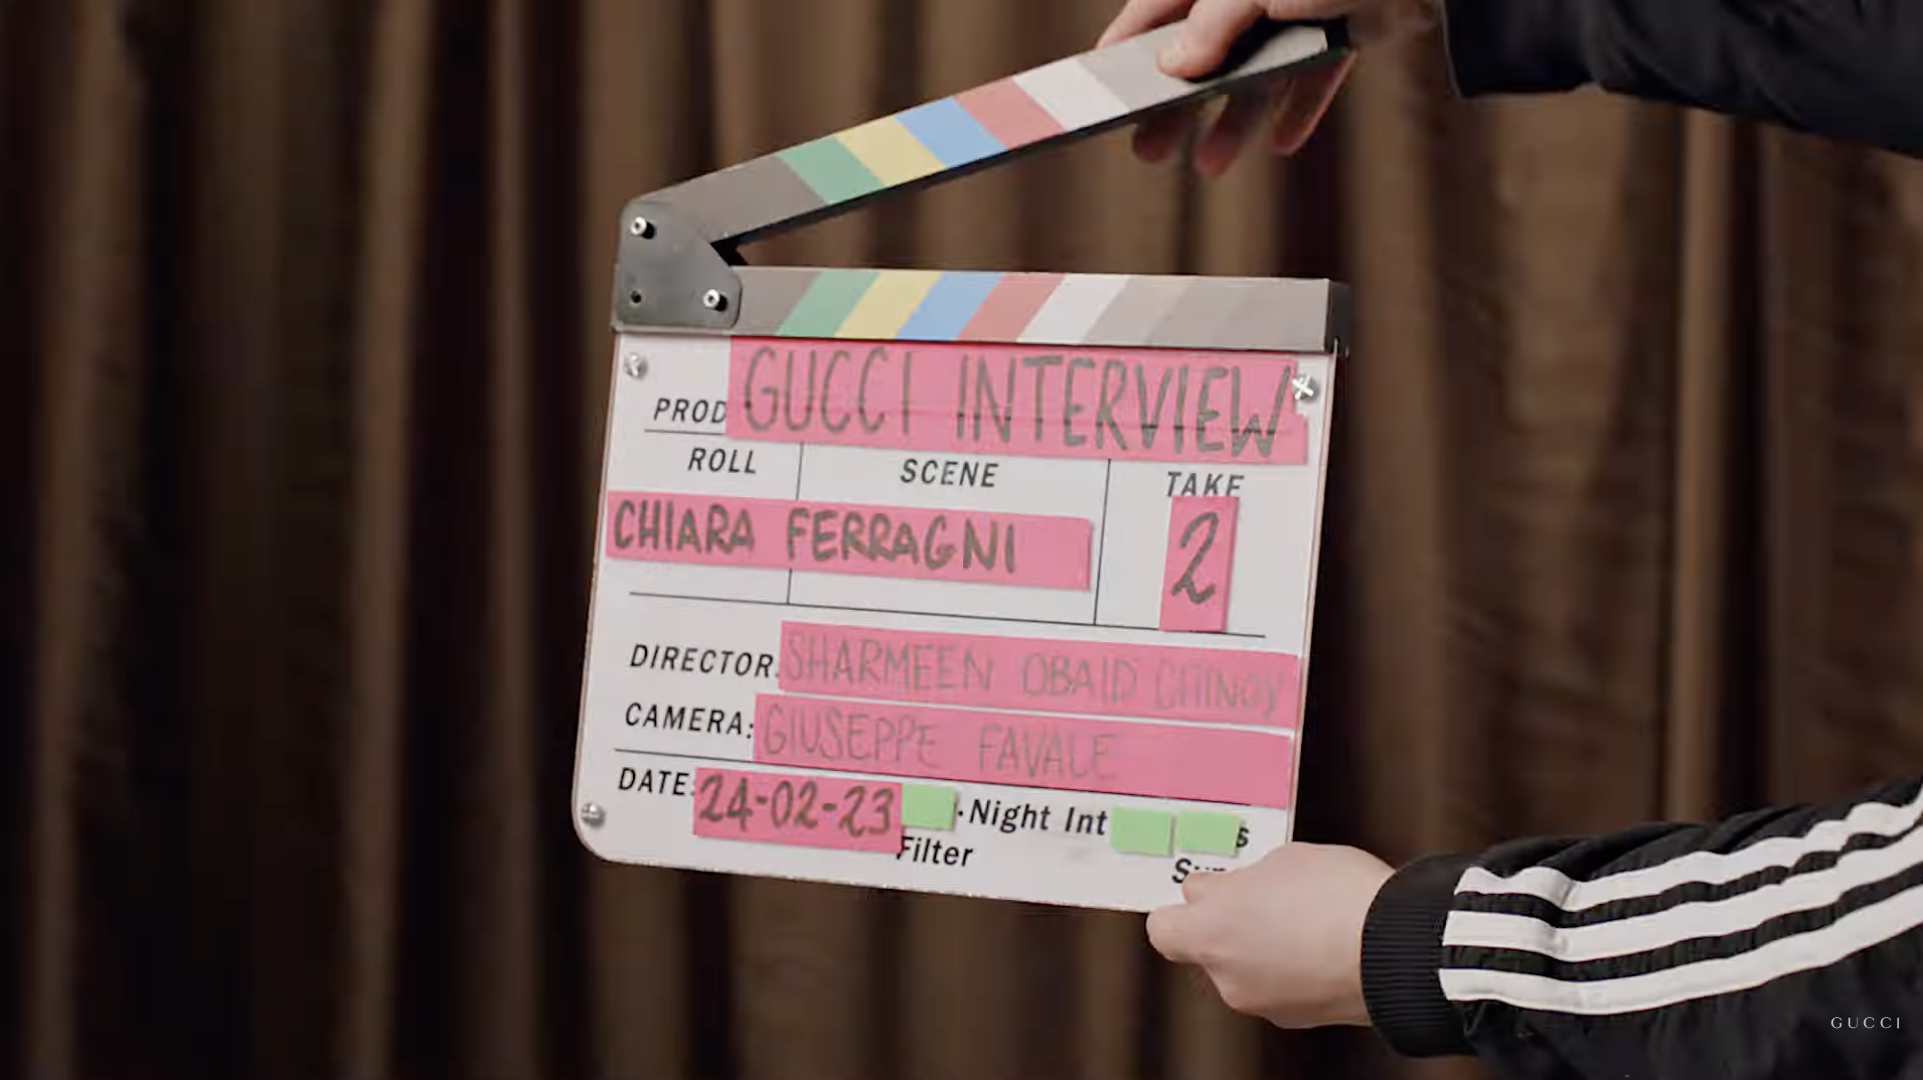 The fashion house released a star-studded video series showcasing how far their mission of gender equality has come, and how far it still has left to go. Image credit: Gucci